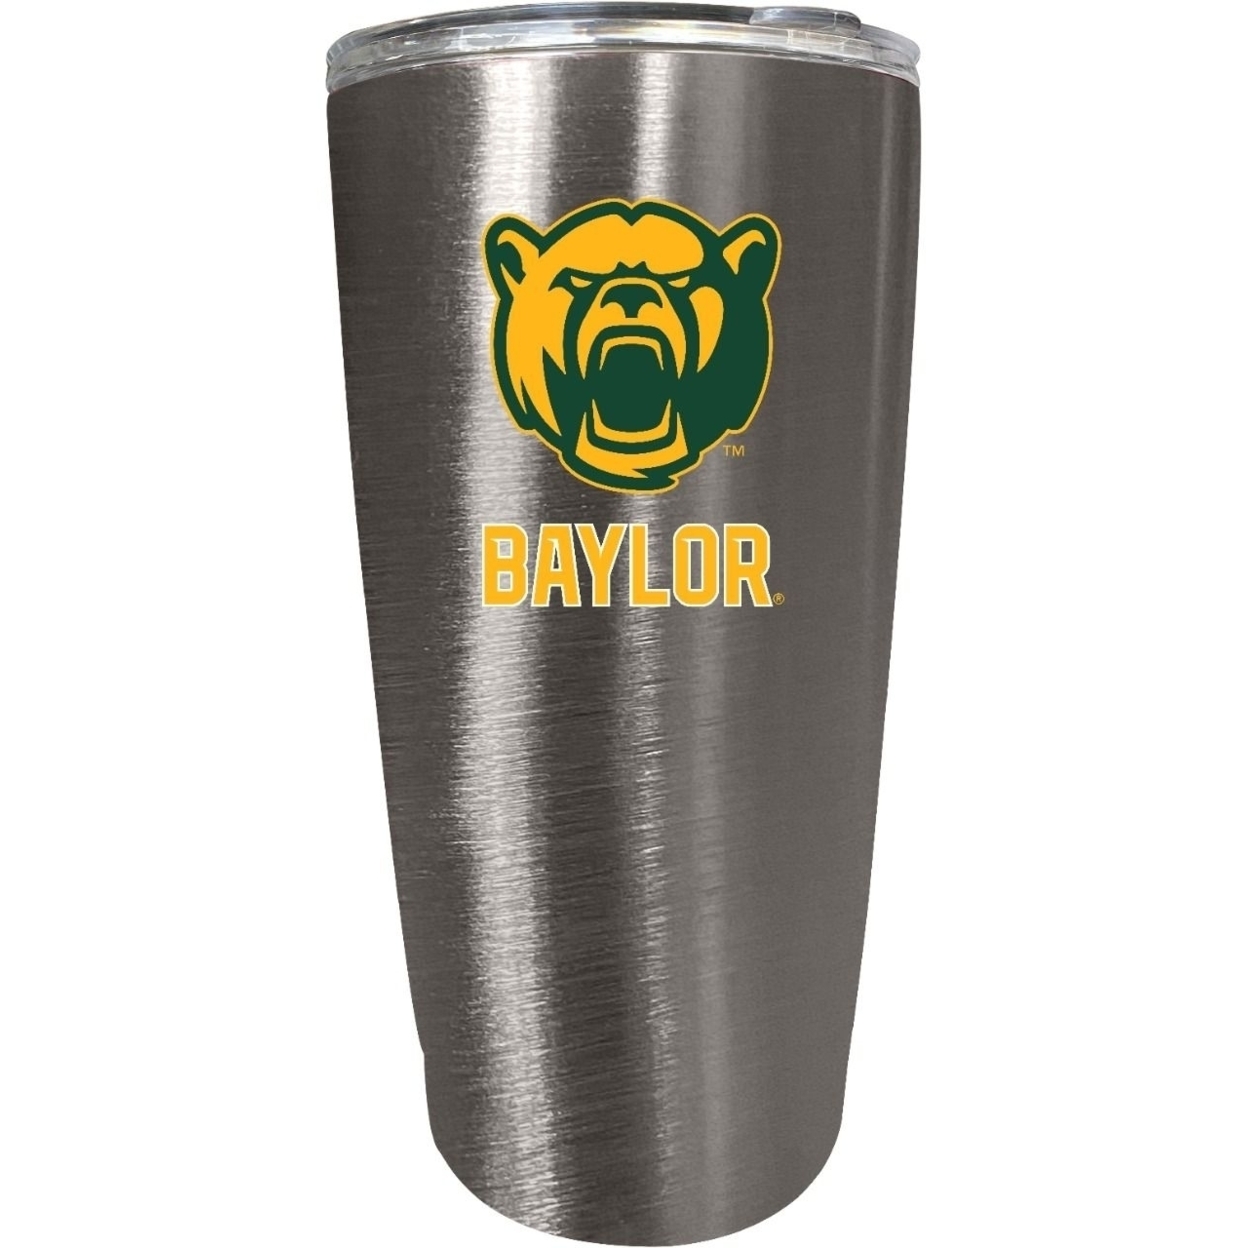 Baylor Bears 16 Oz Insulated Stainless Steel Tumbler Colorless